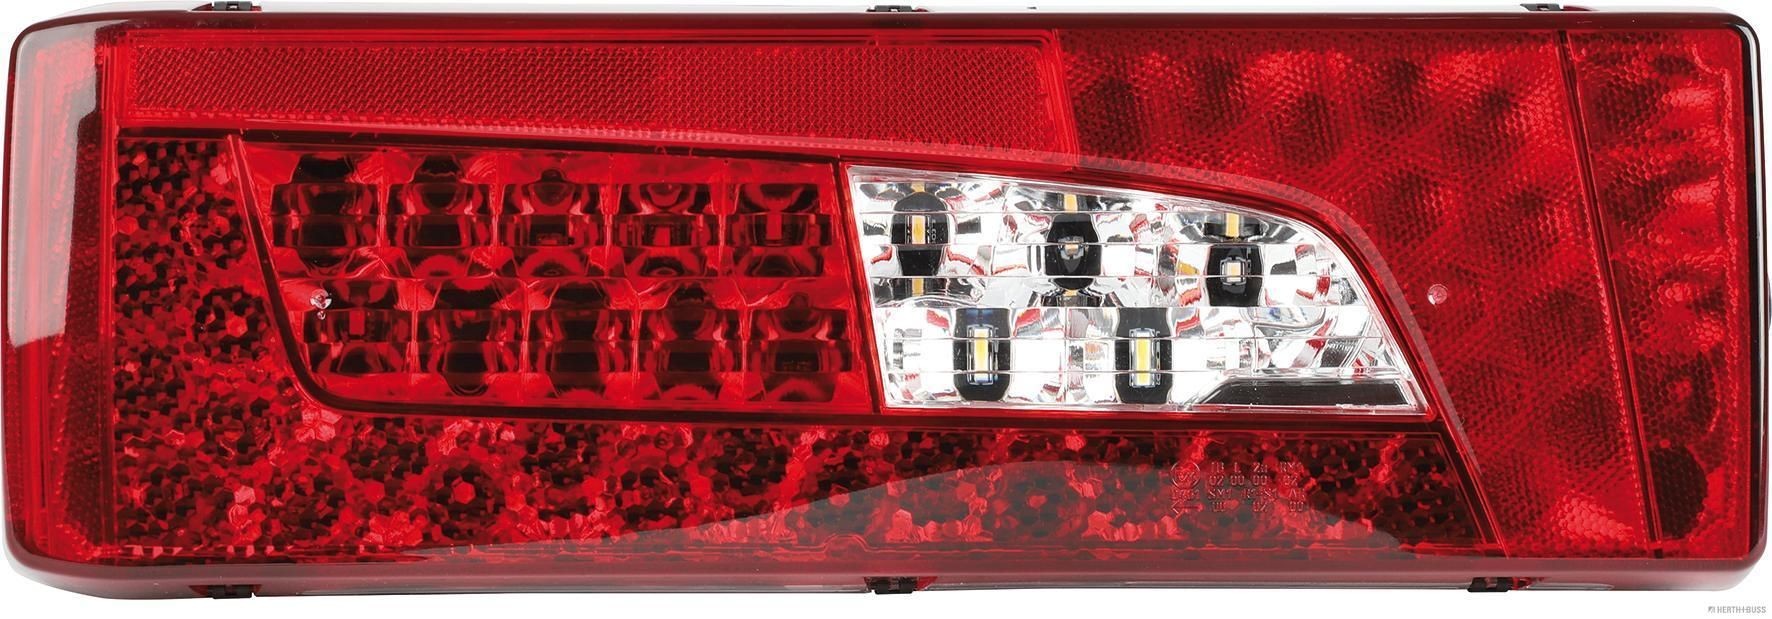 HERTH+BUSS ELPARTS 83840590 Taillight 1905044